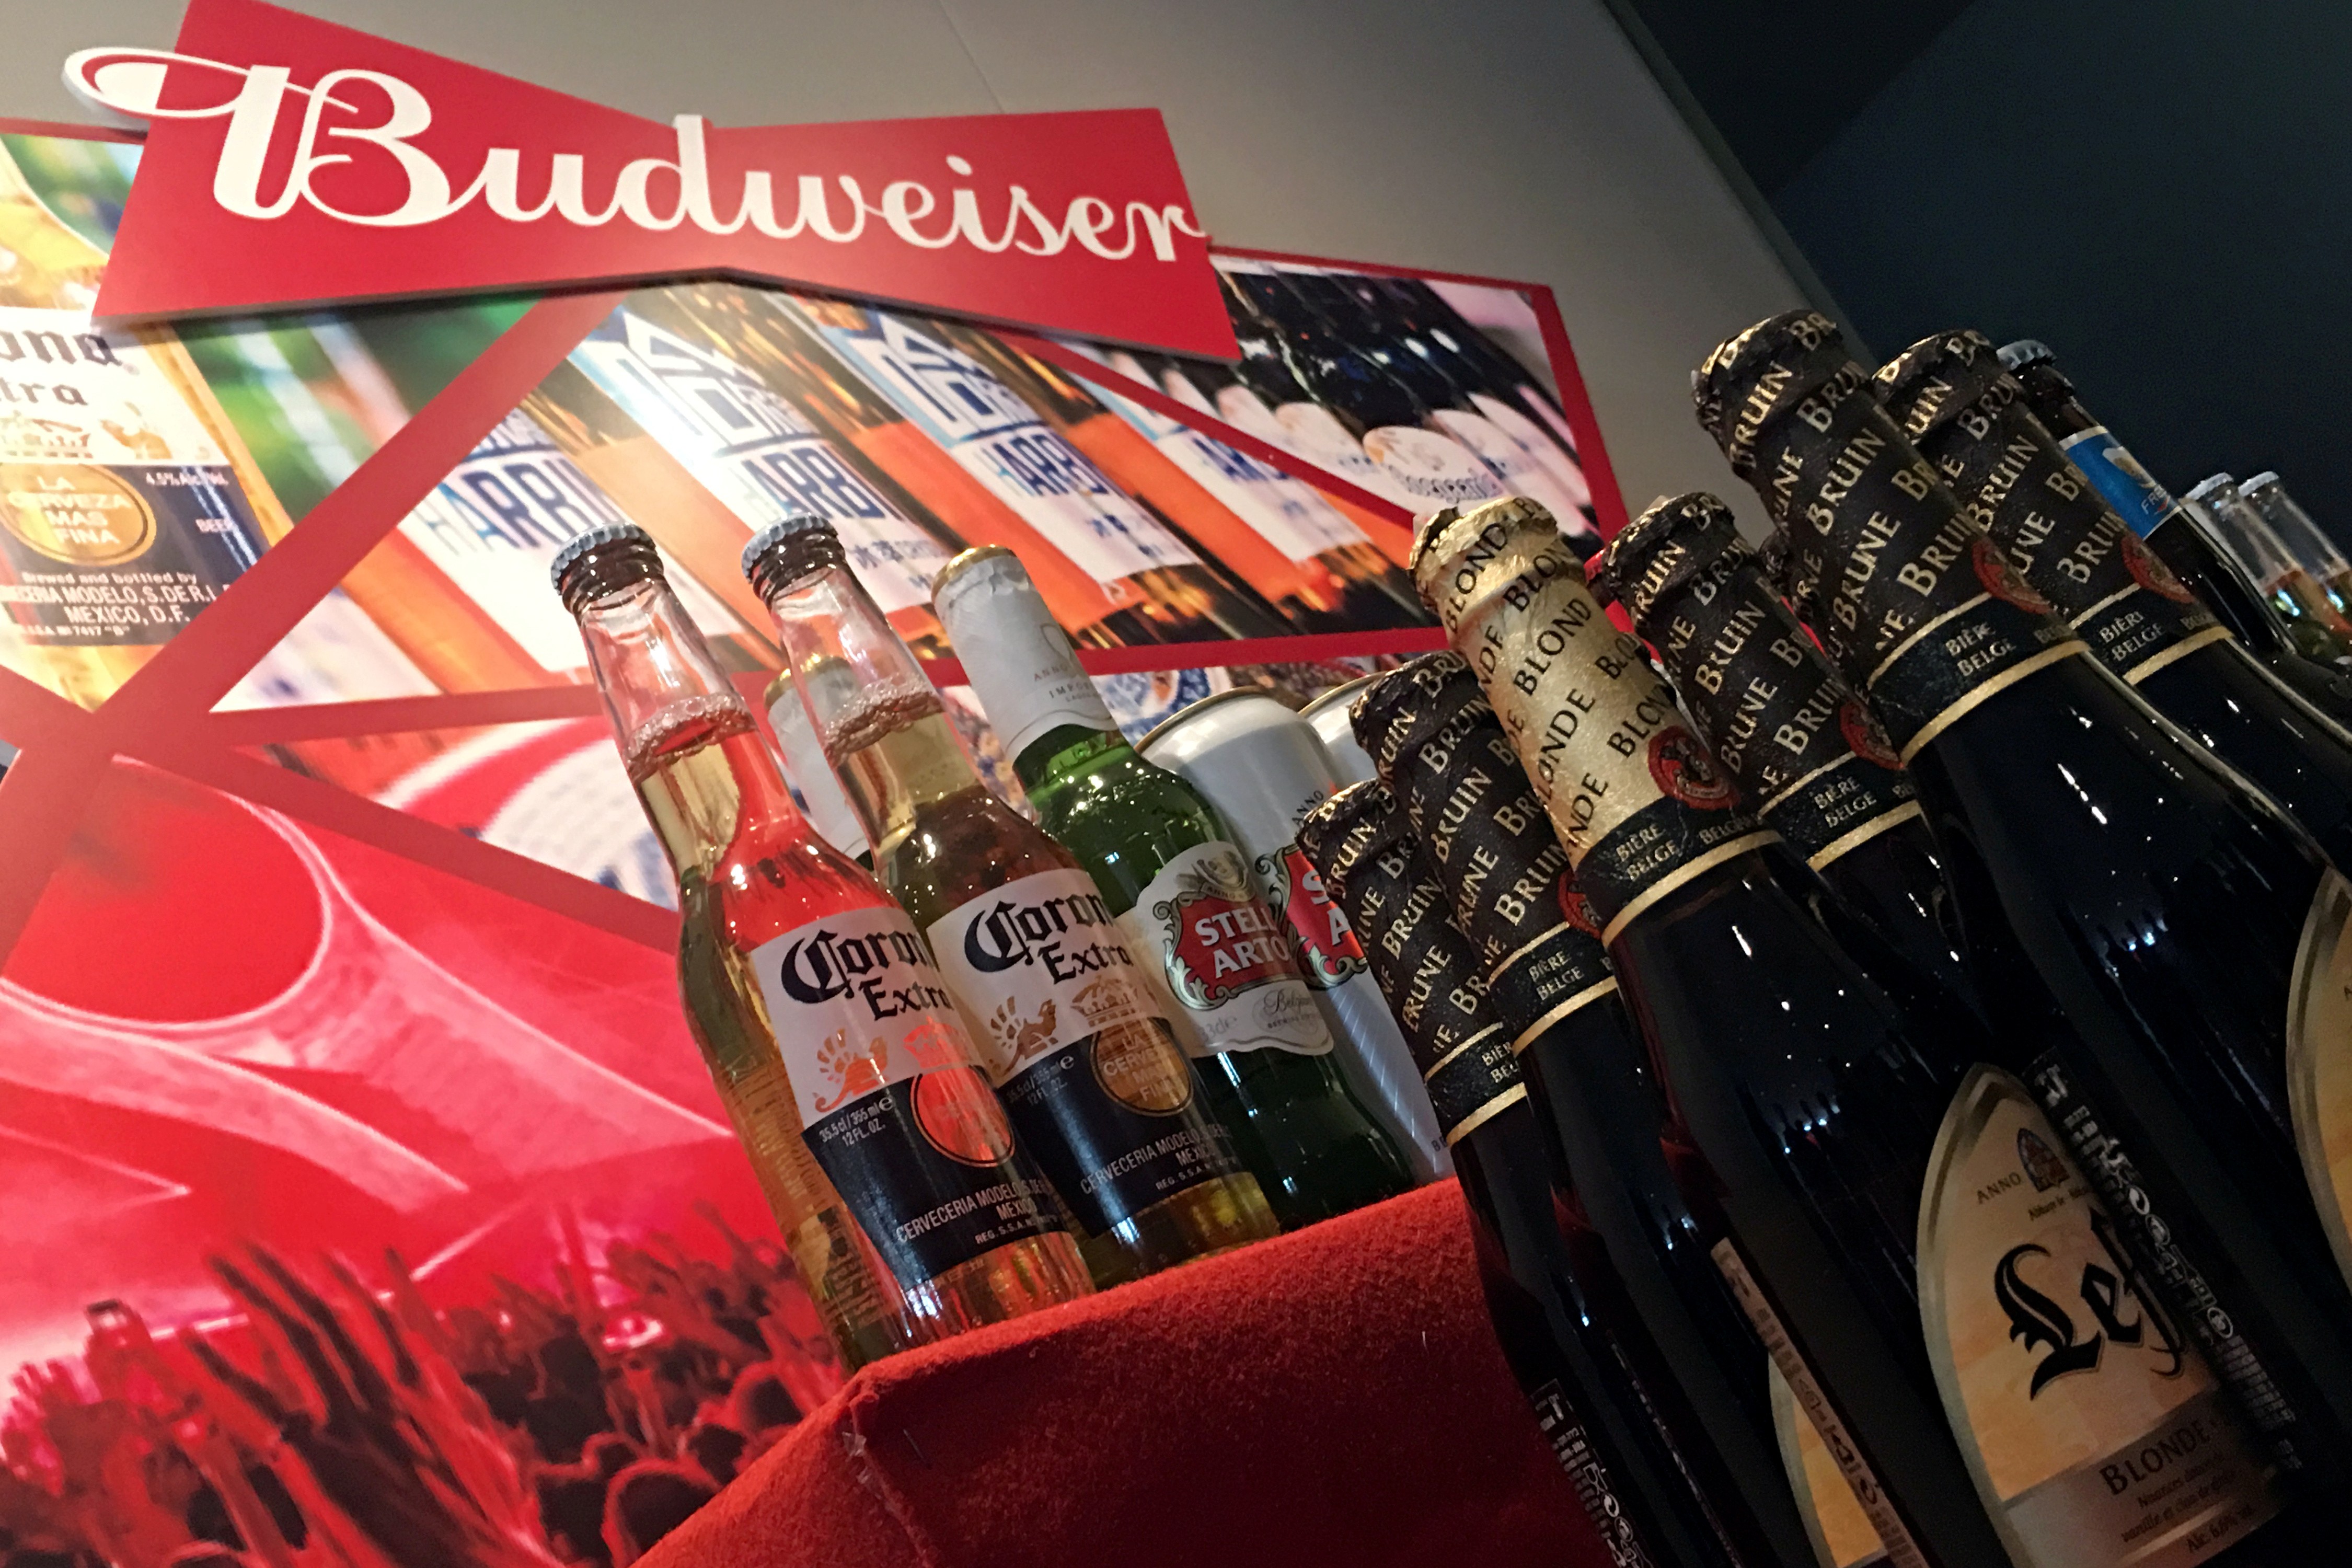 Budweiser initially hoped to raise as much as US$9.8 billion. Photo: Reuters